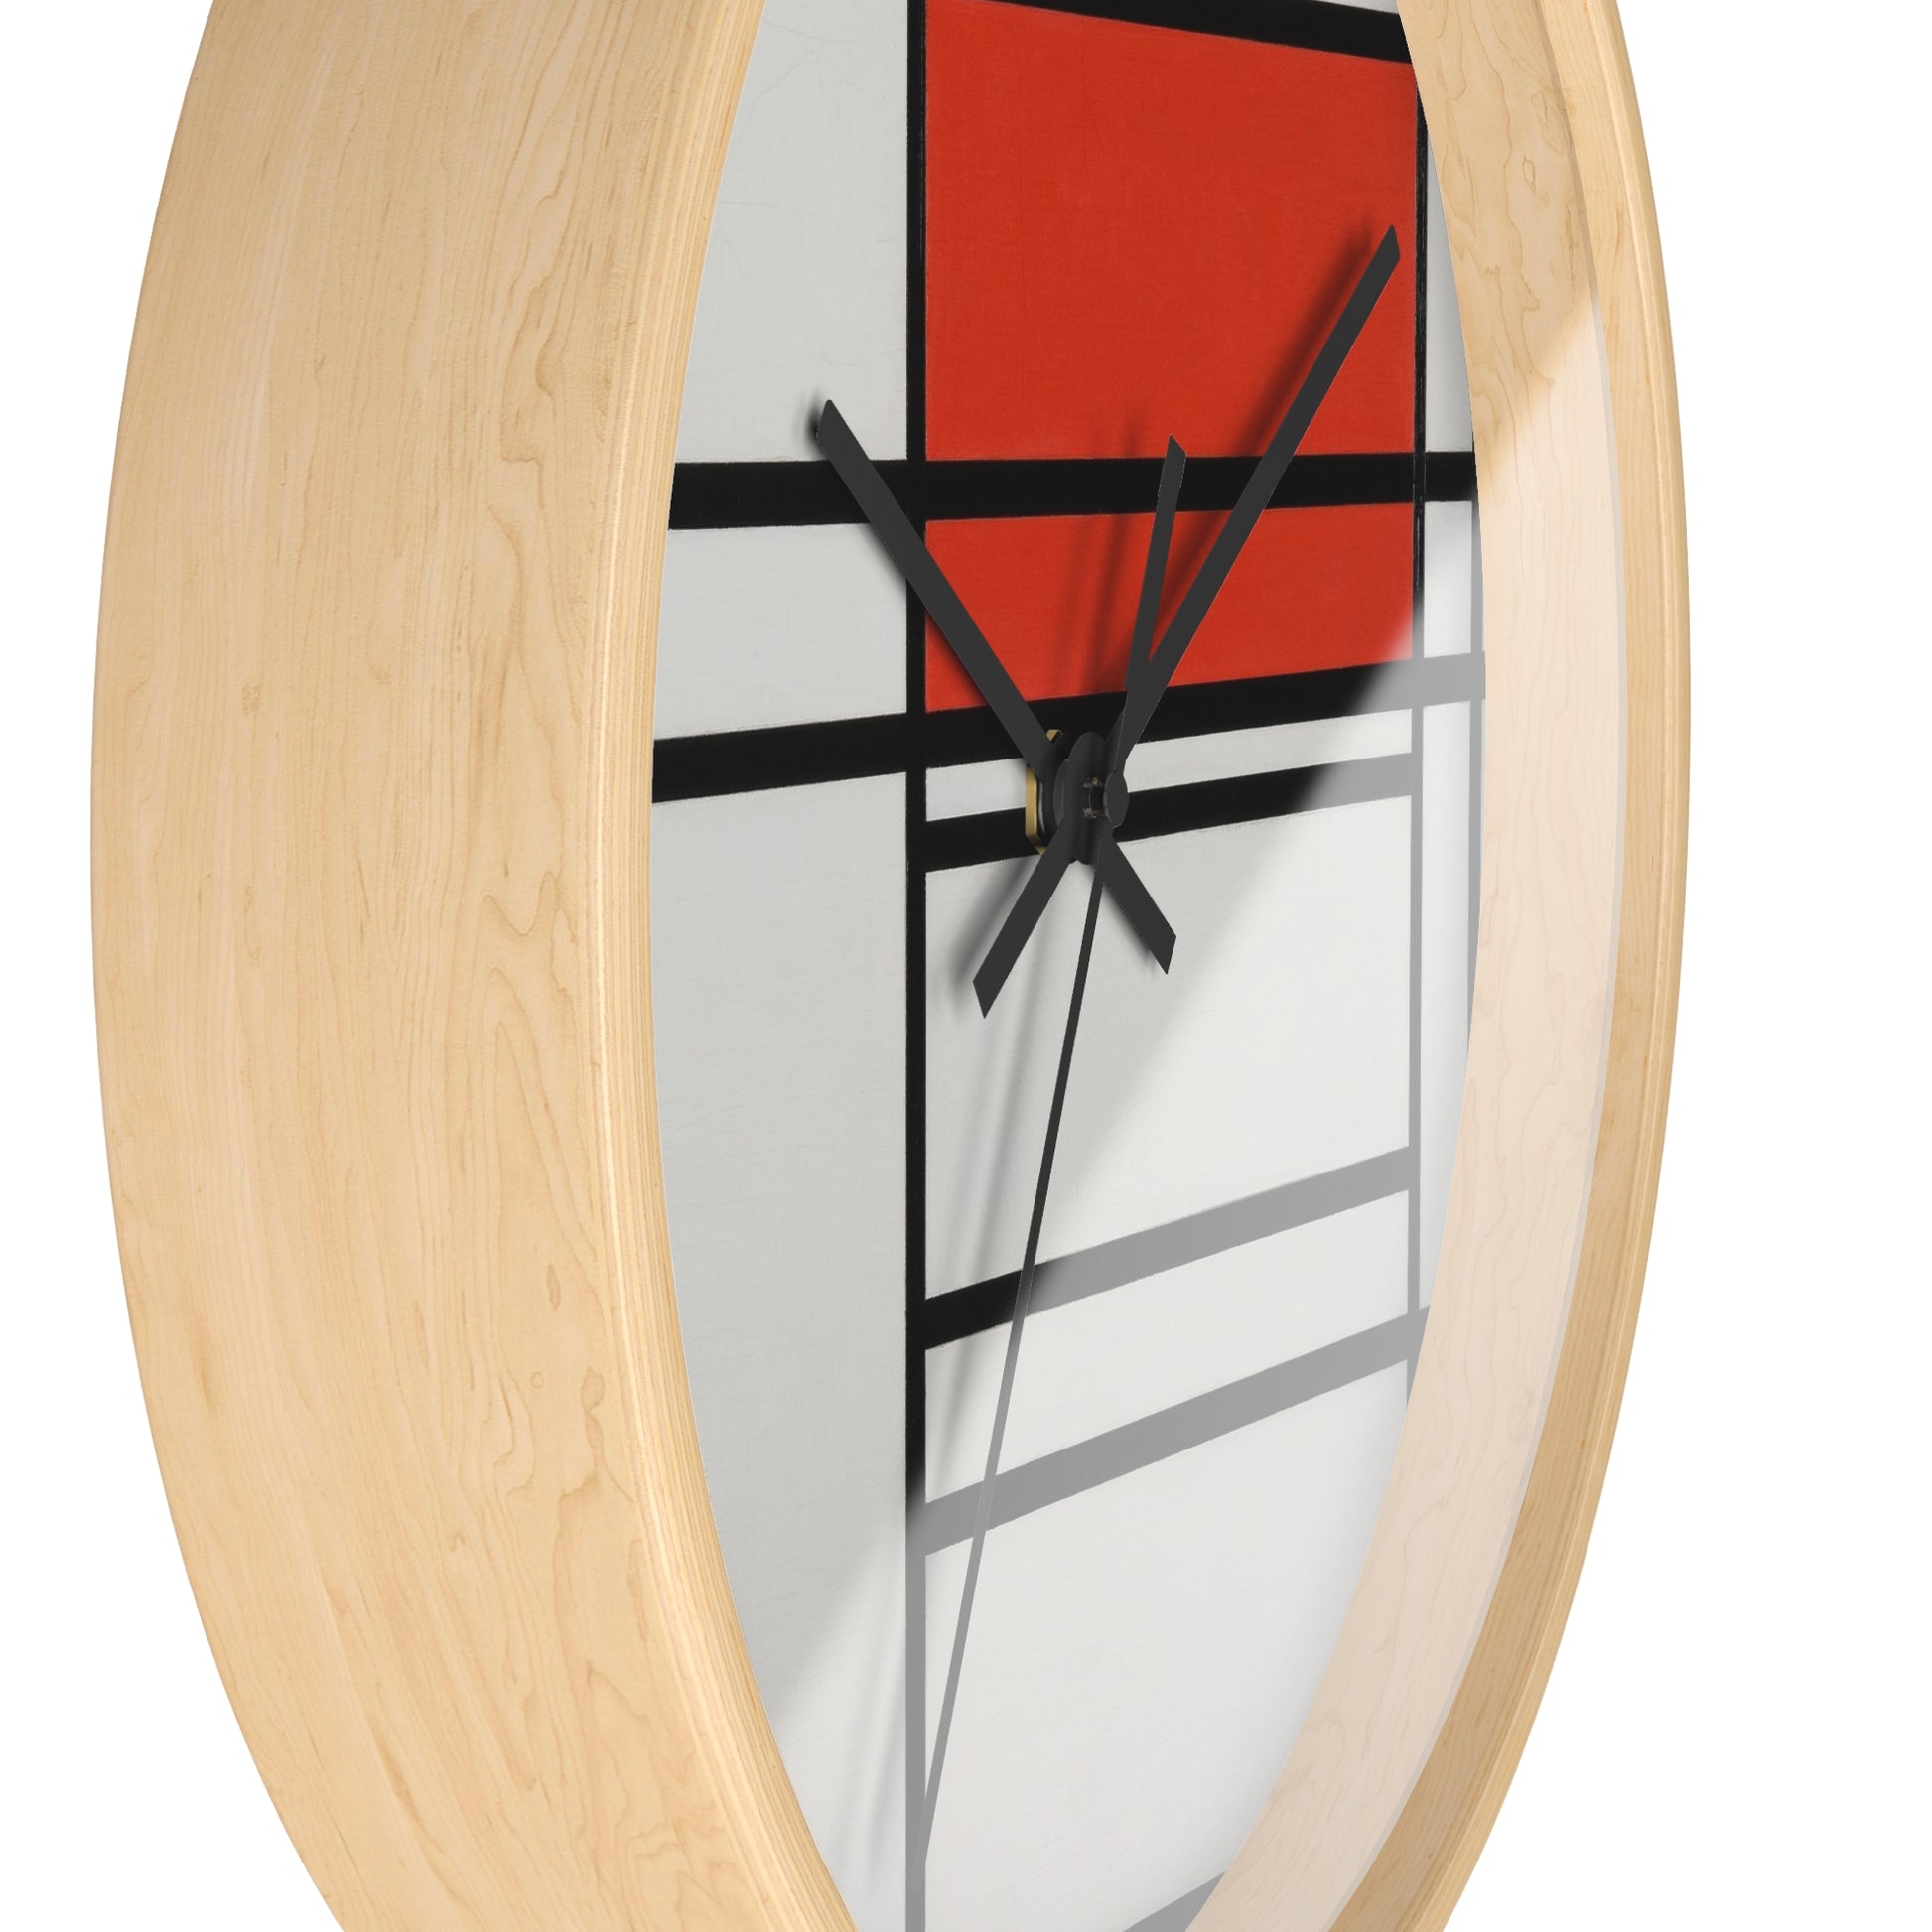 PIET MONDRIAN - COMPOSITION OF RED AND WHITE; Nom 1 - ART CLOCK